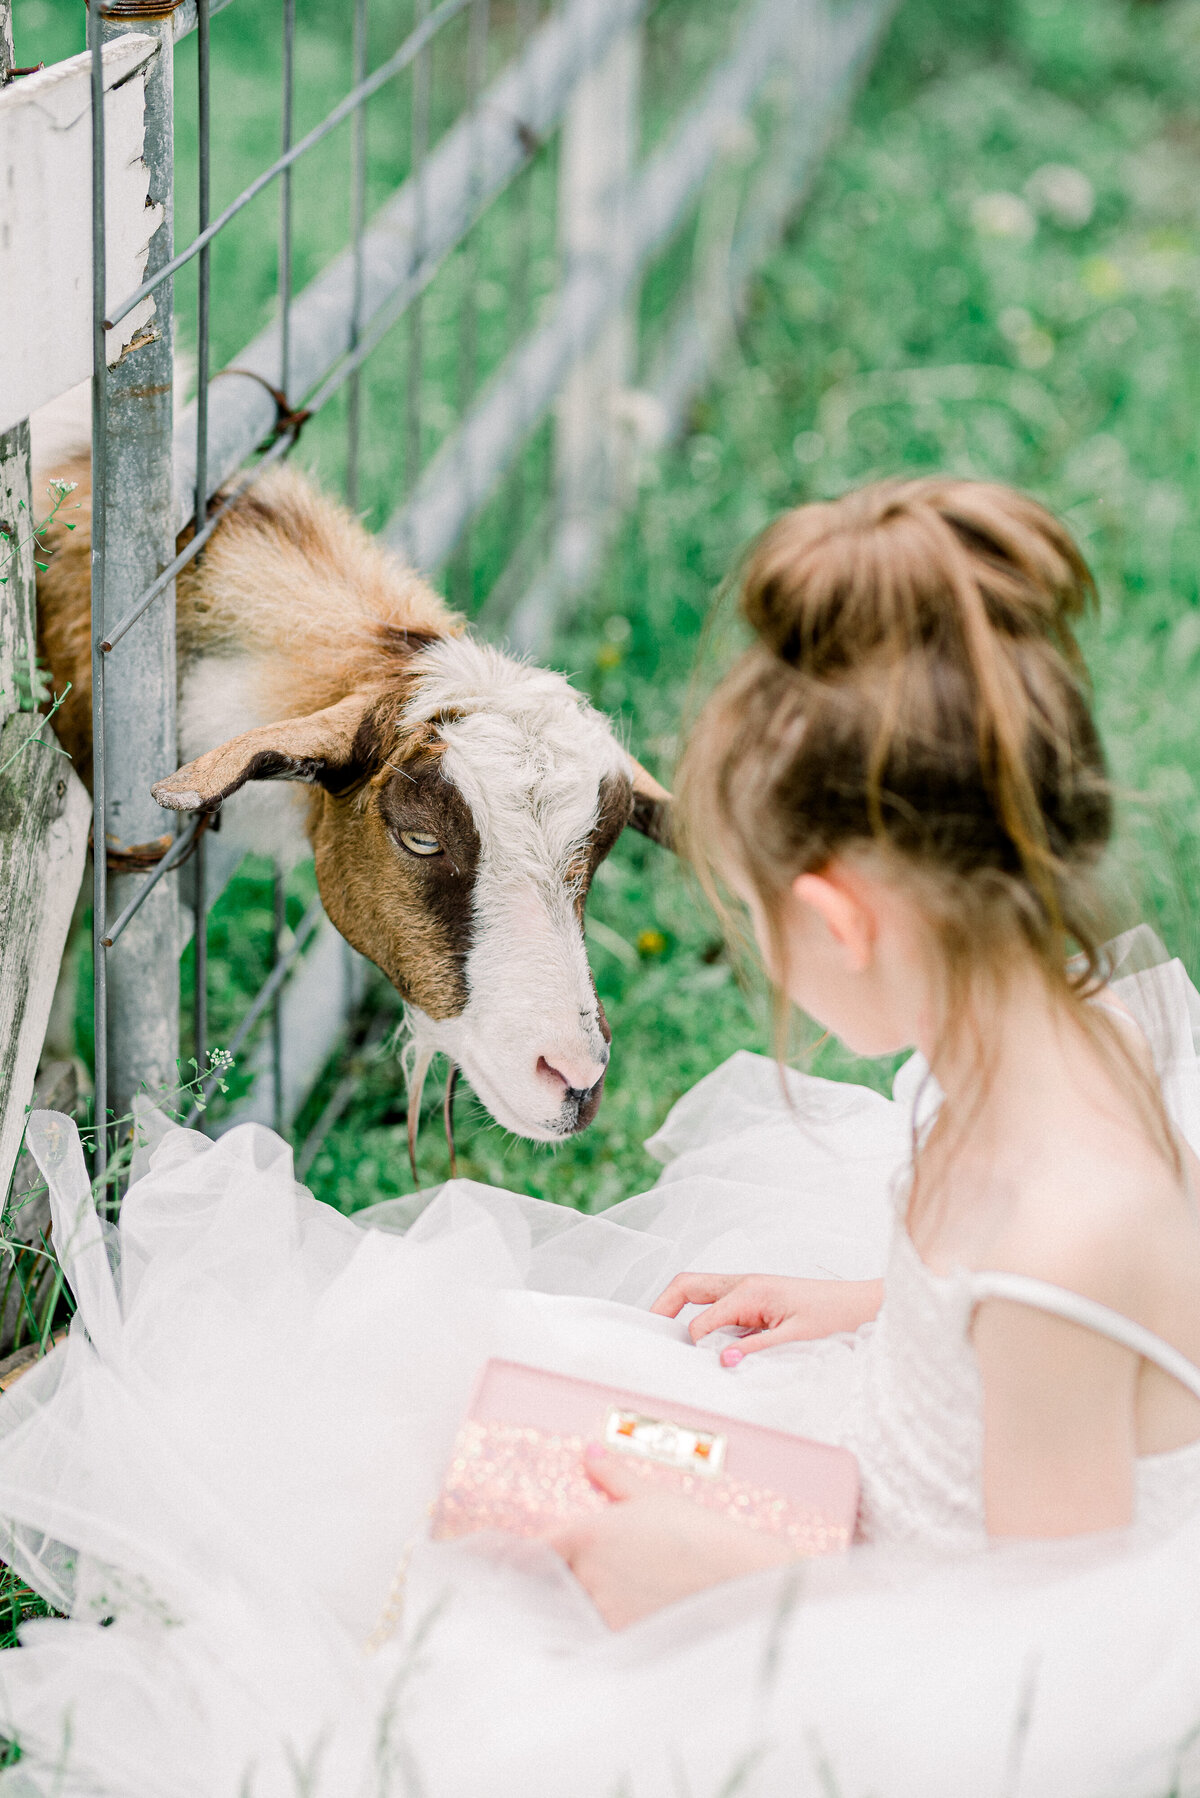 Flower girl in white dress, pink purse, petting a goat